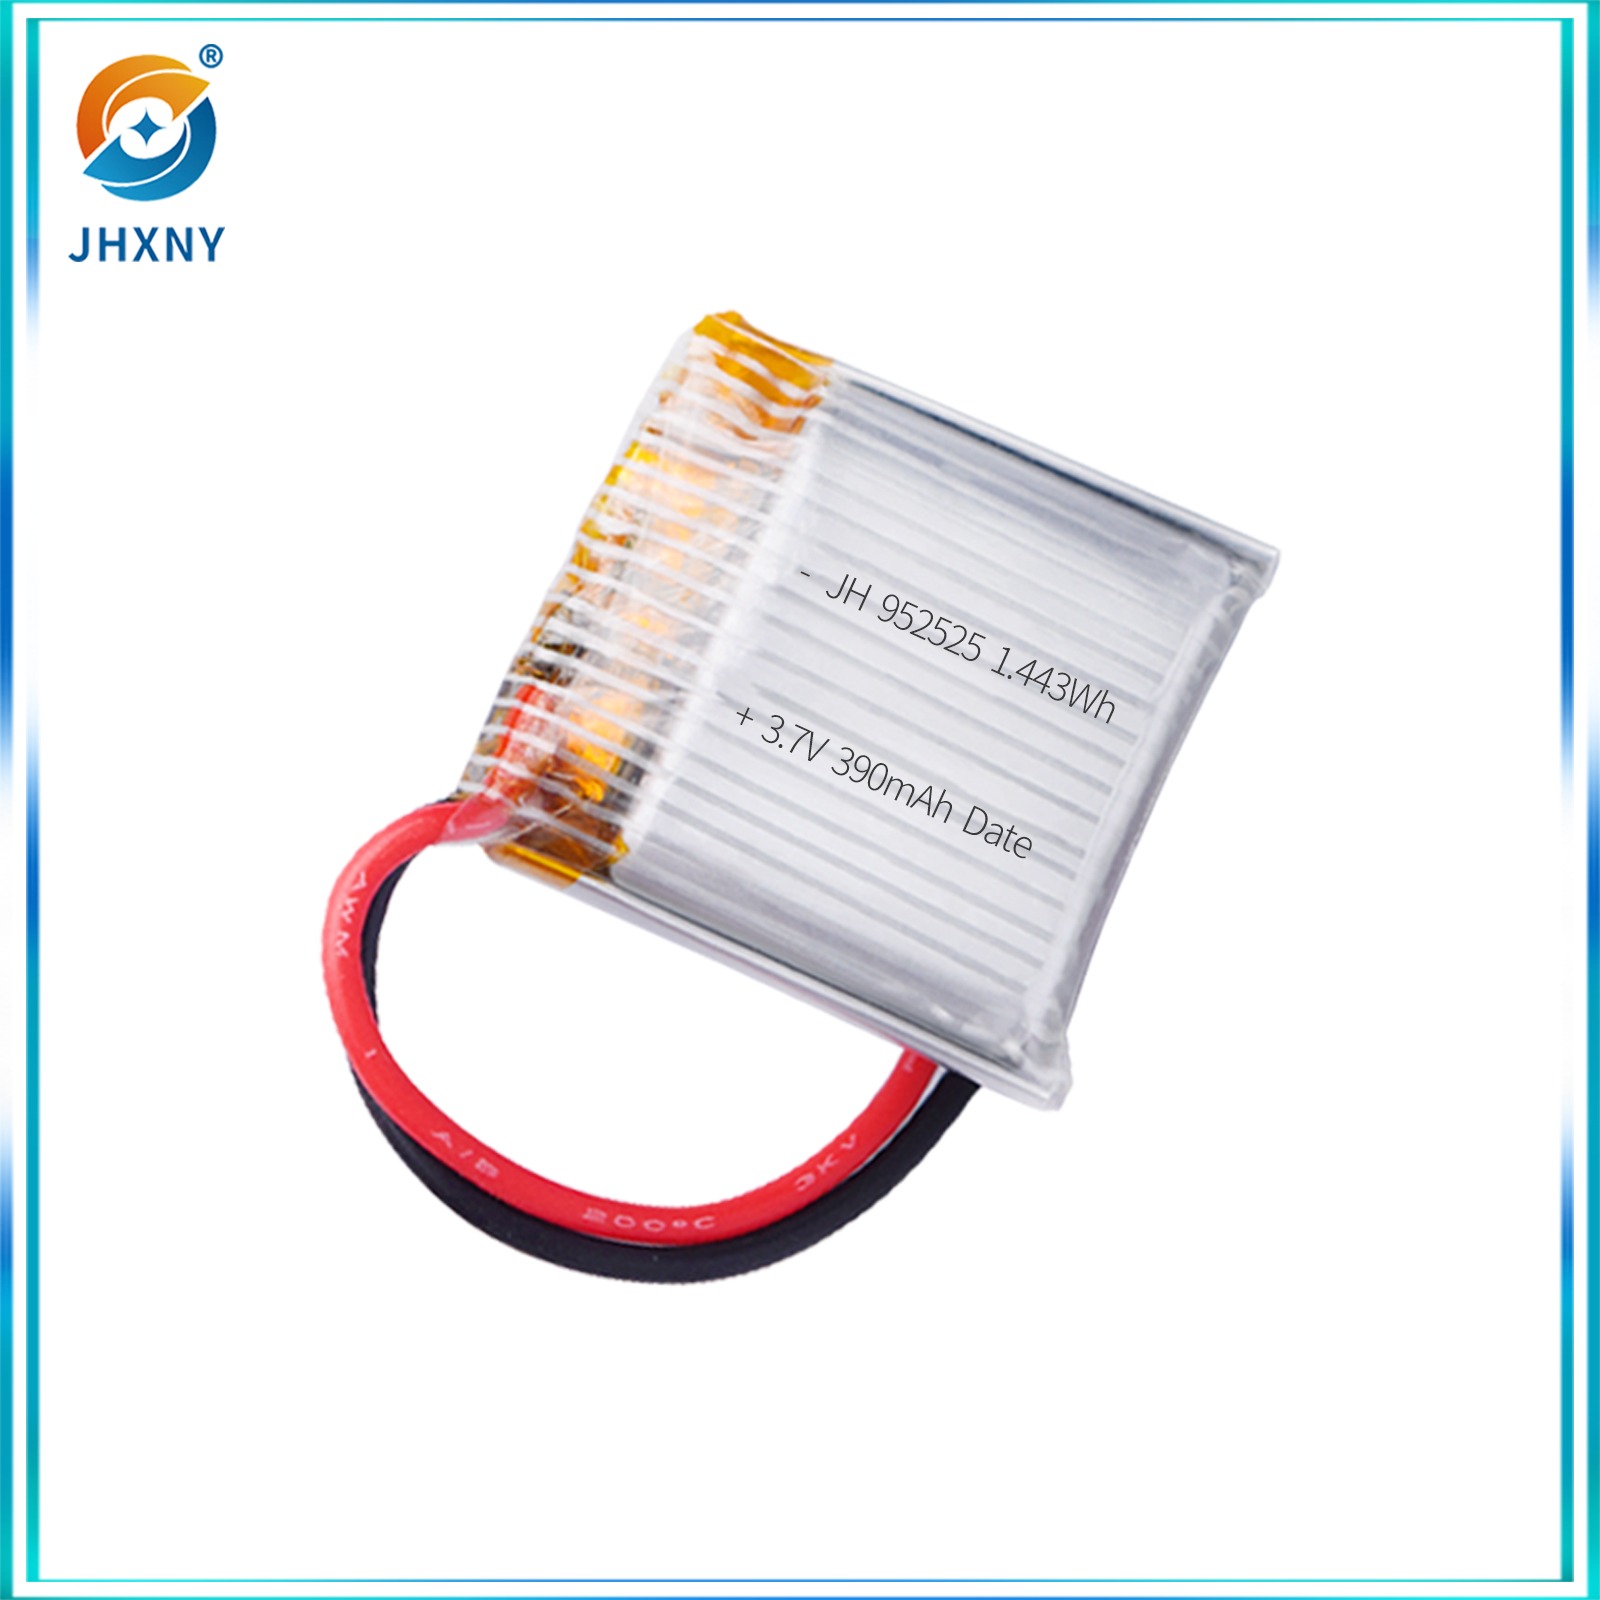 JU952525 3.7V390mAh polymer lithium battery Mixing cup Remote control racing car high speed water boat laser therapy instrument Electric screwdriver exfoliator